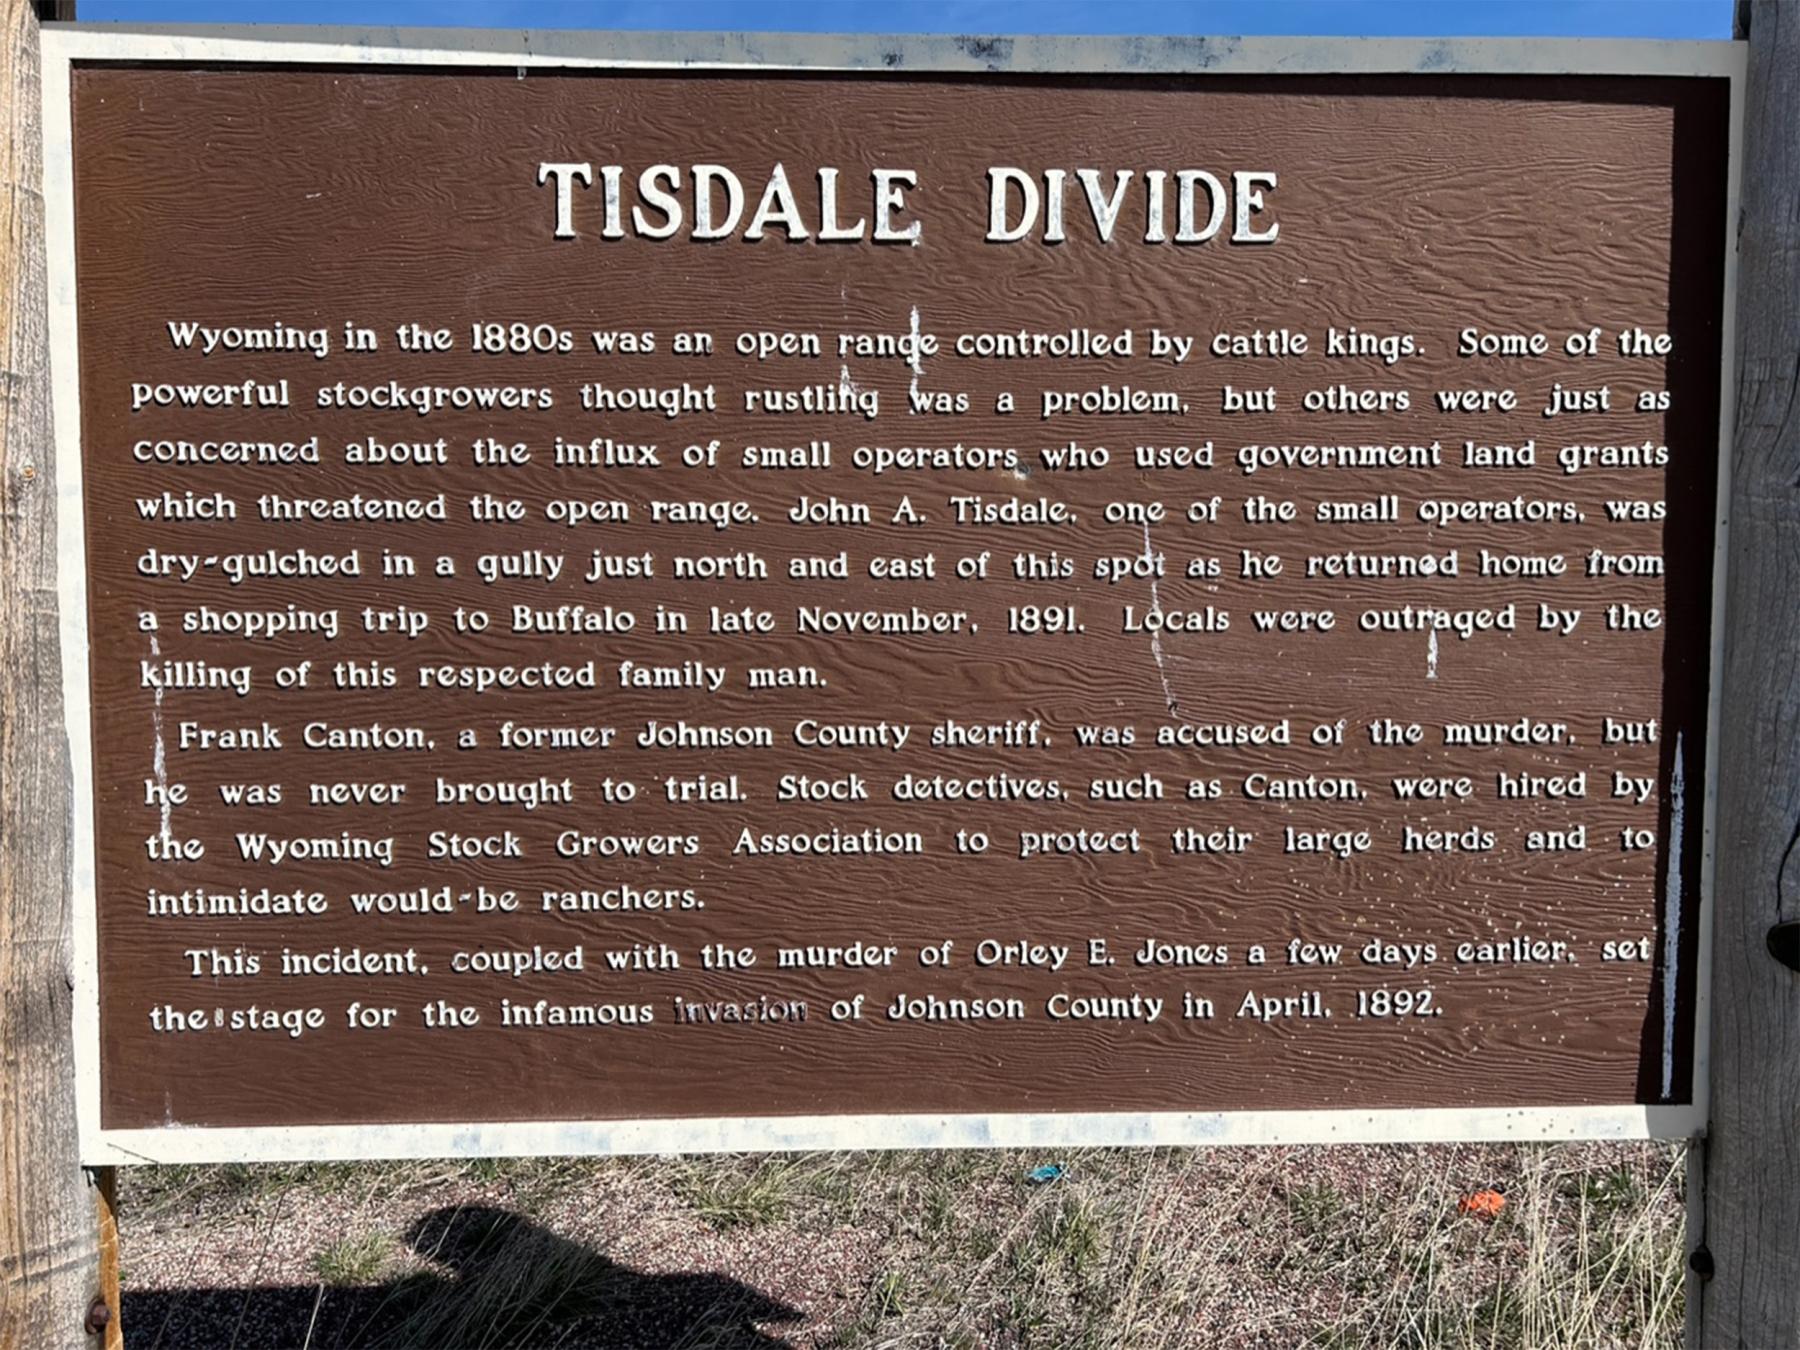 The marker today on Wyoming Highway 196 about eight miles south of Buffalo, near the site of John A. Tisdale’s murder. Frank Canton’s name is still asssociated with the event. Most historians are convinced he did not commit the crime, but almost certainly knew who did. Tom Rea photo.